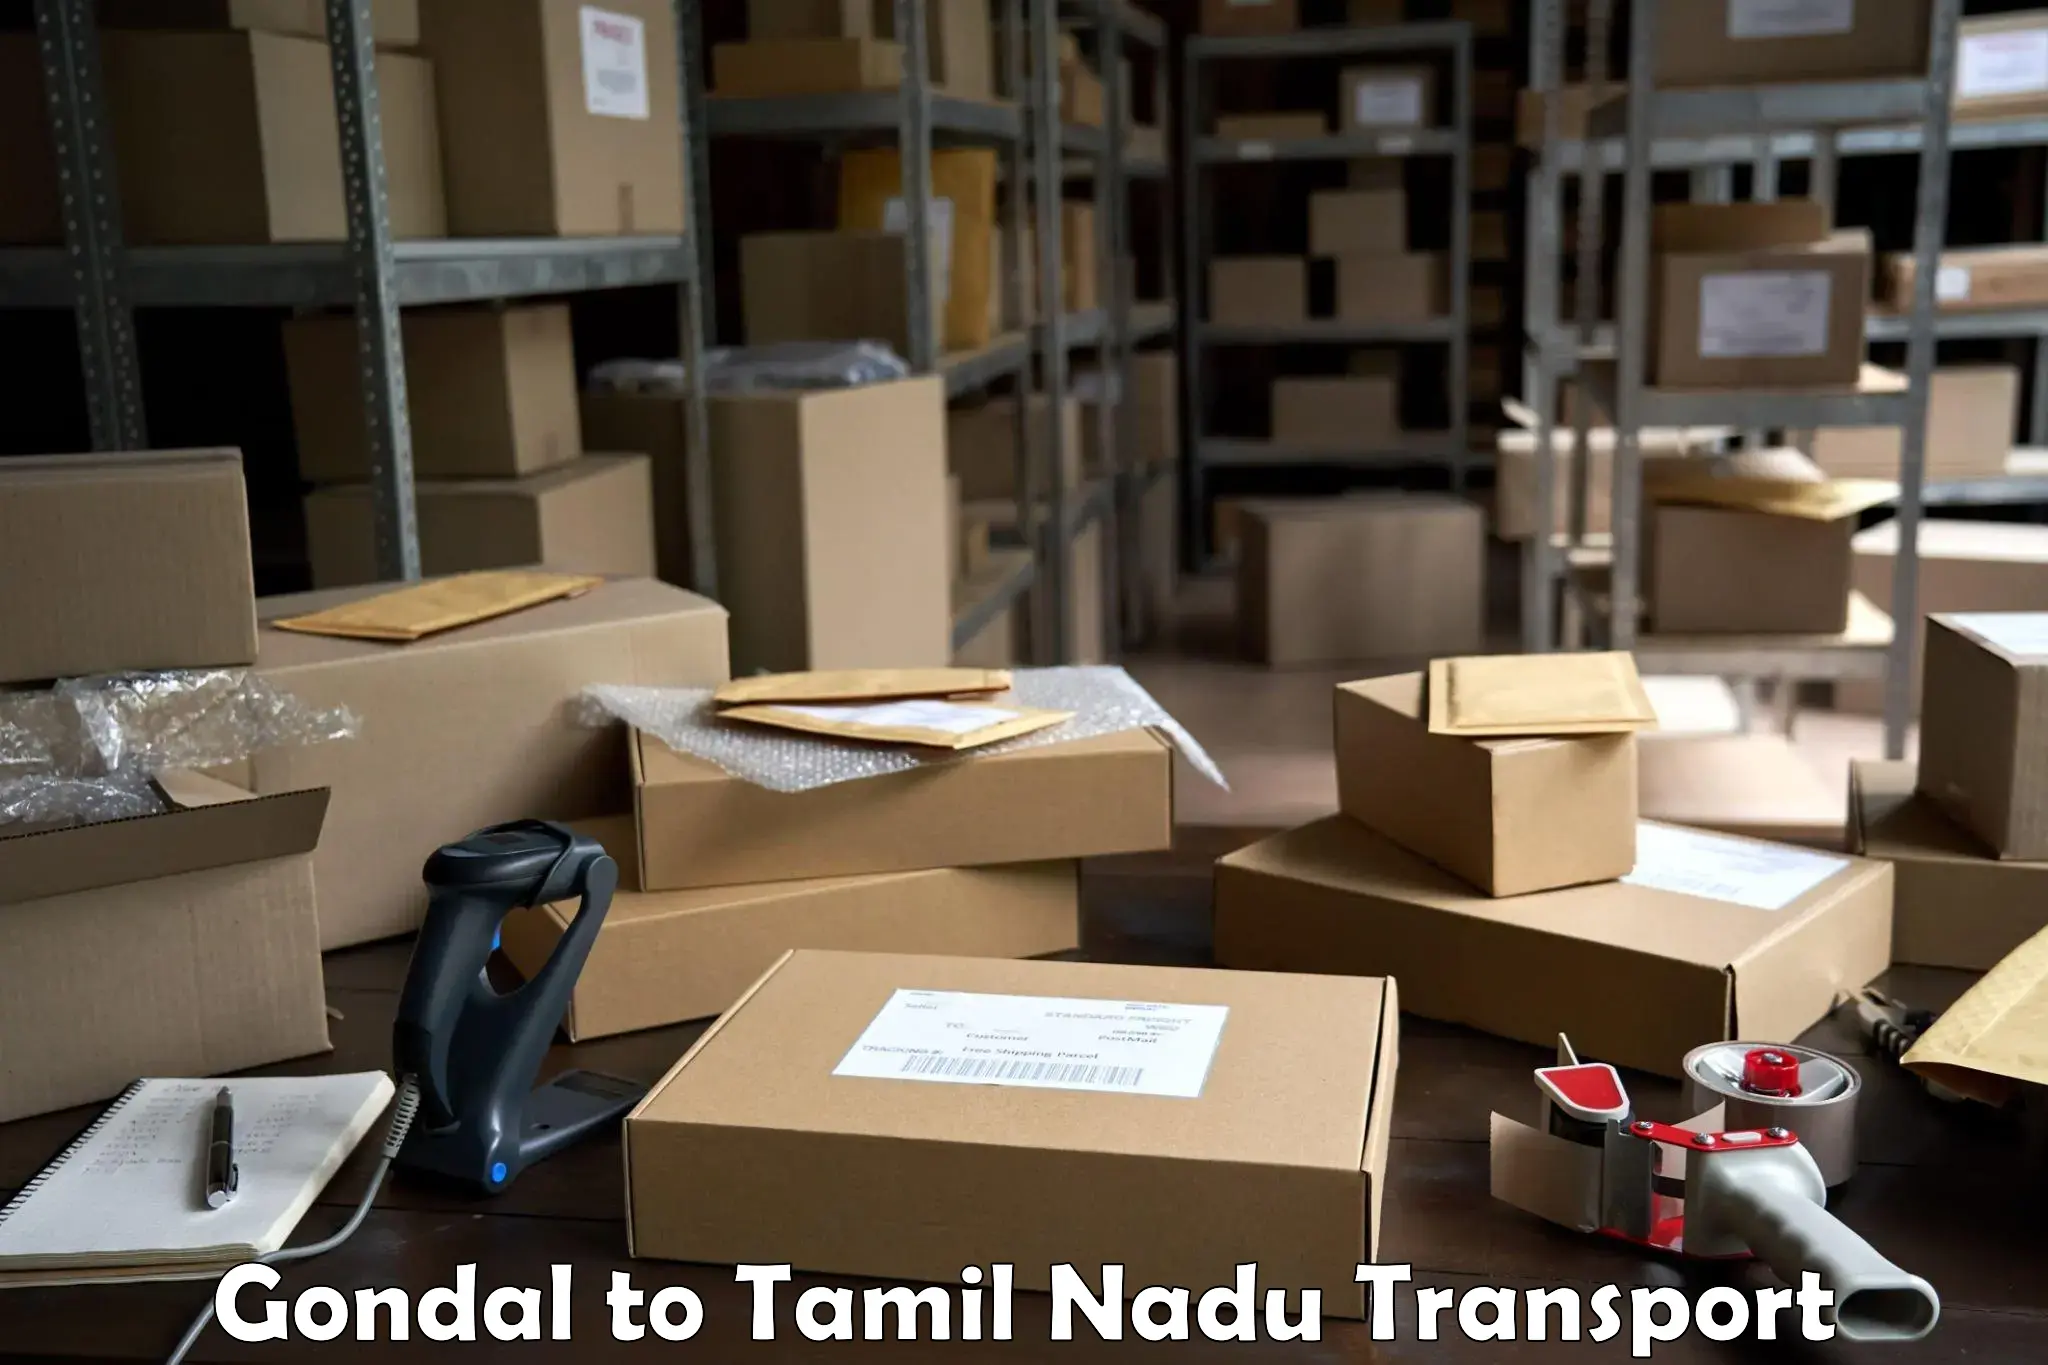 Road transport services Gondal to Chennai Port